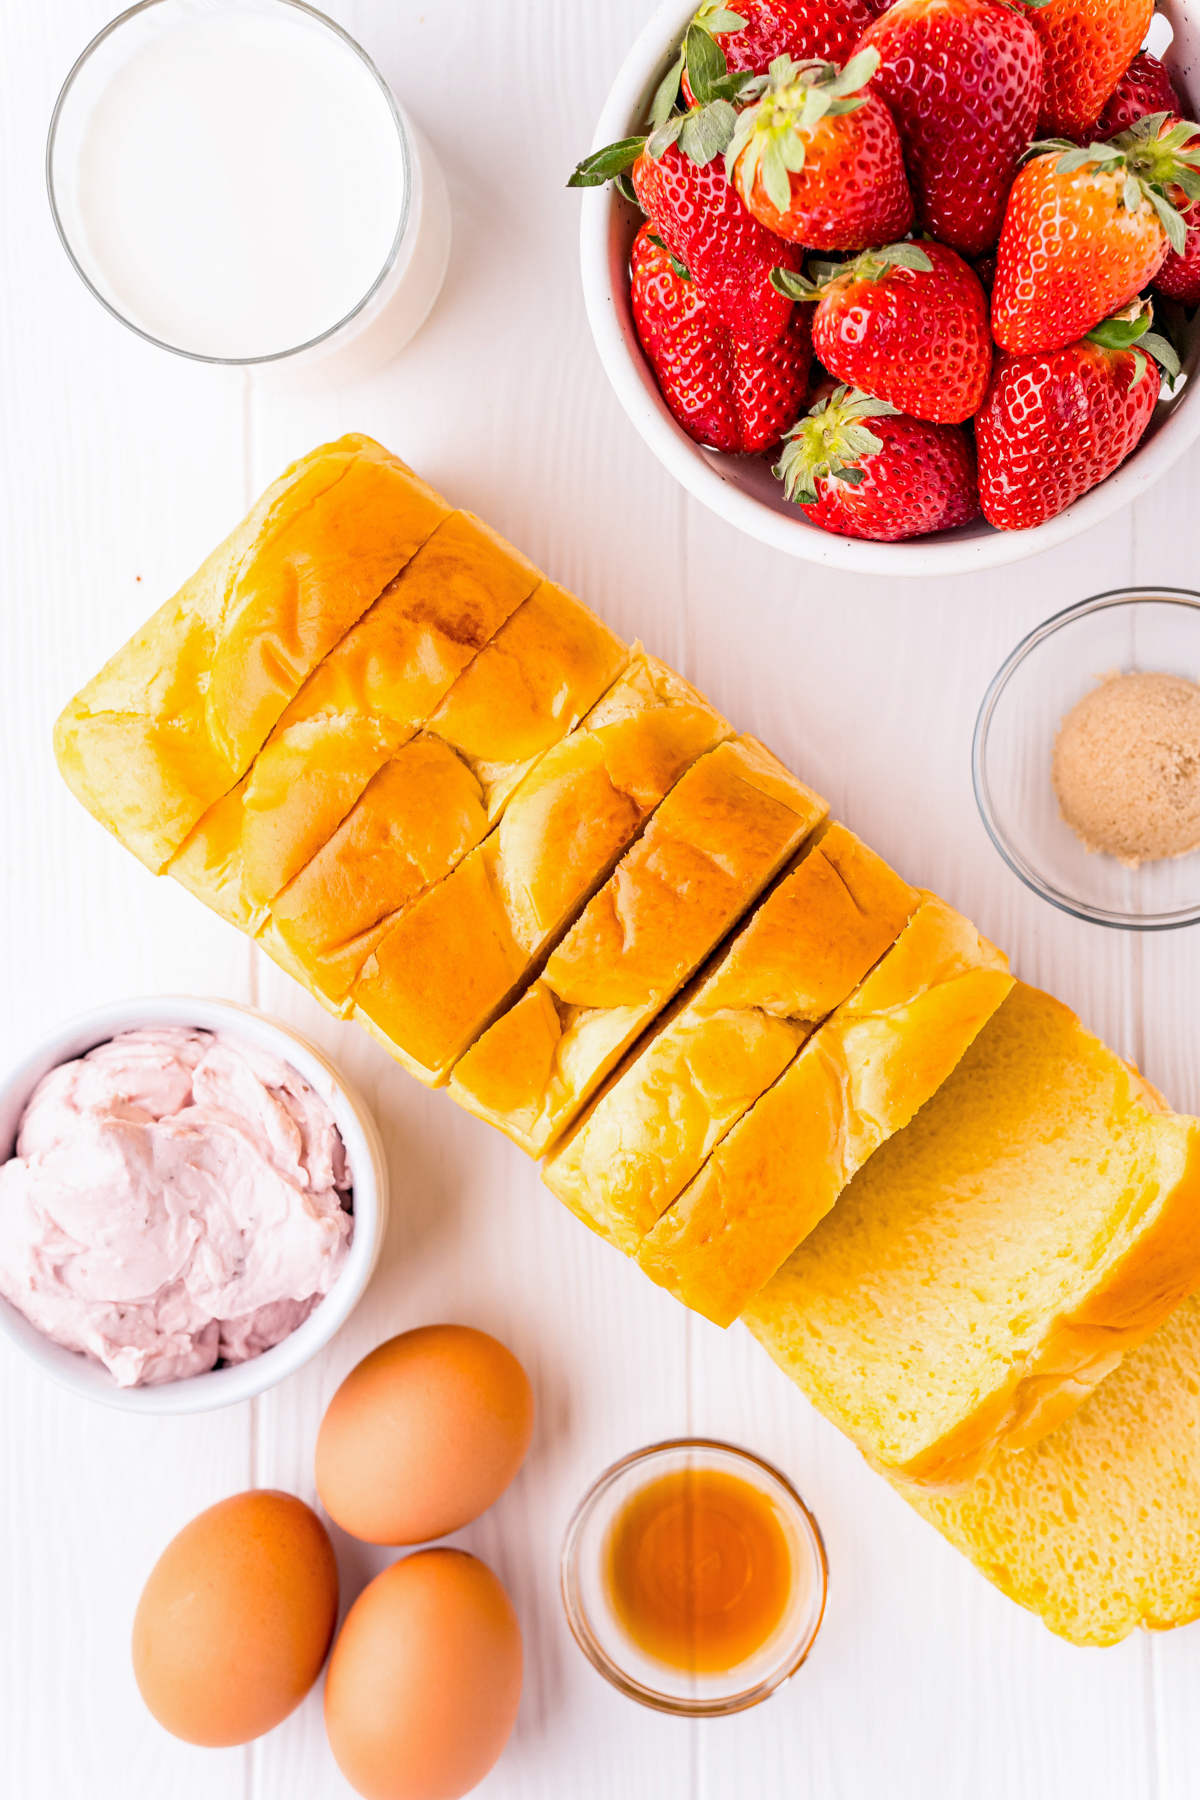 Ingredients needed to make Strawberry Cheesecake Stuffed French Toast